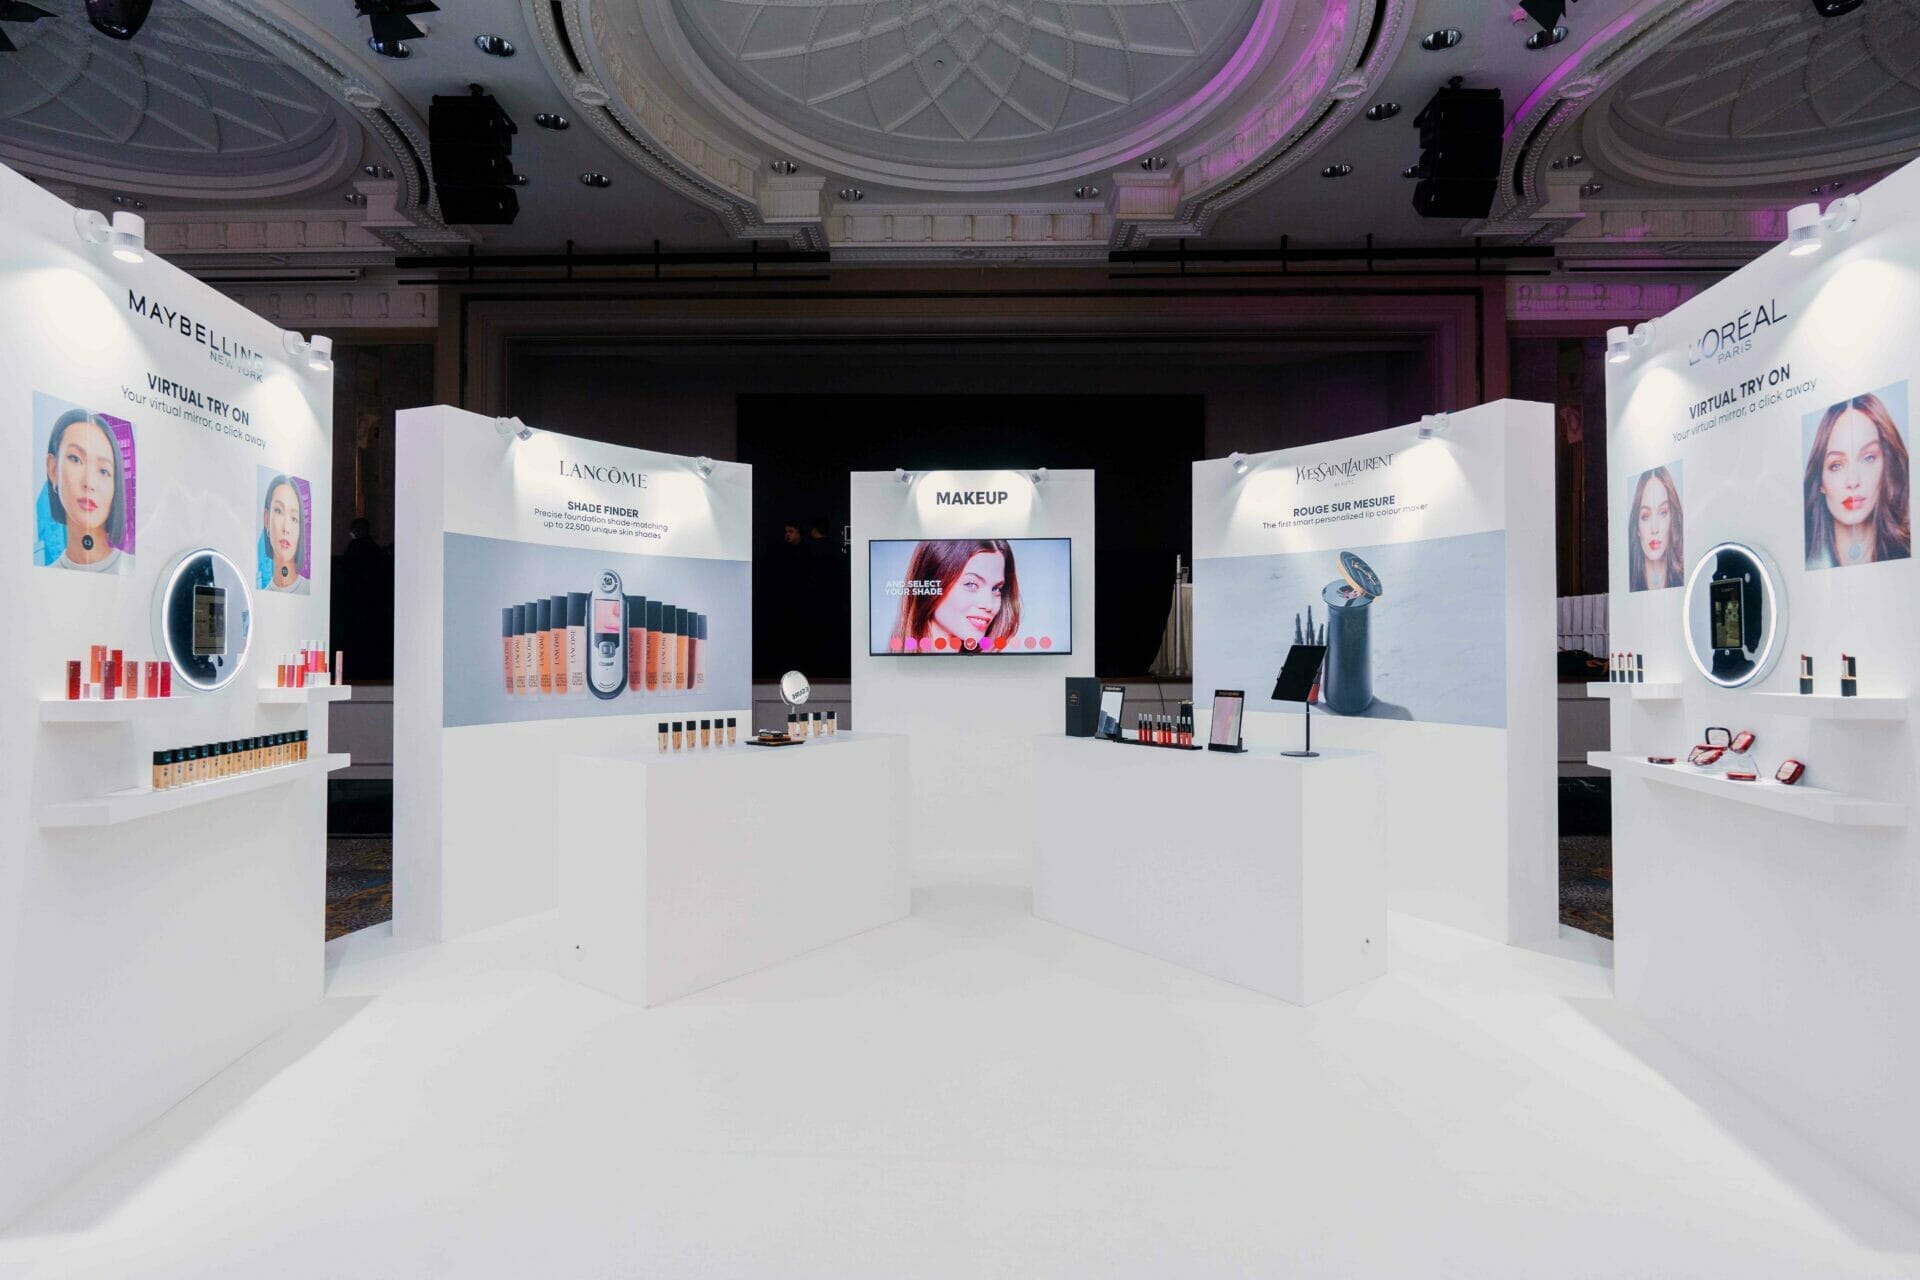 Beauty Tech Corner showcase on the brand's commitment in beauty that moves the world